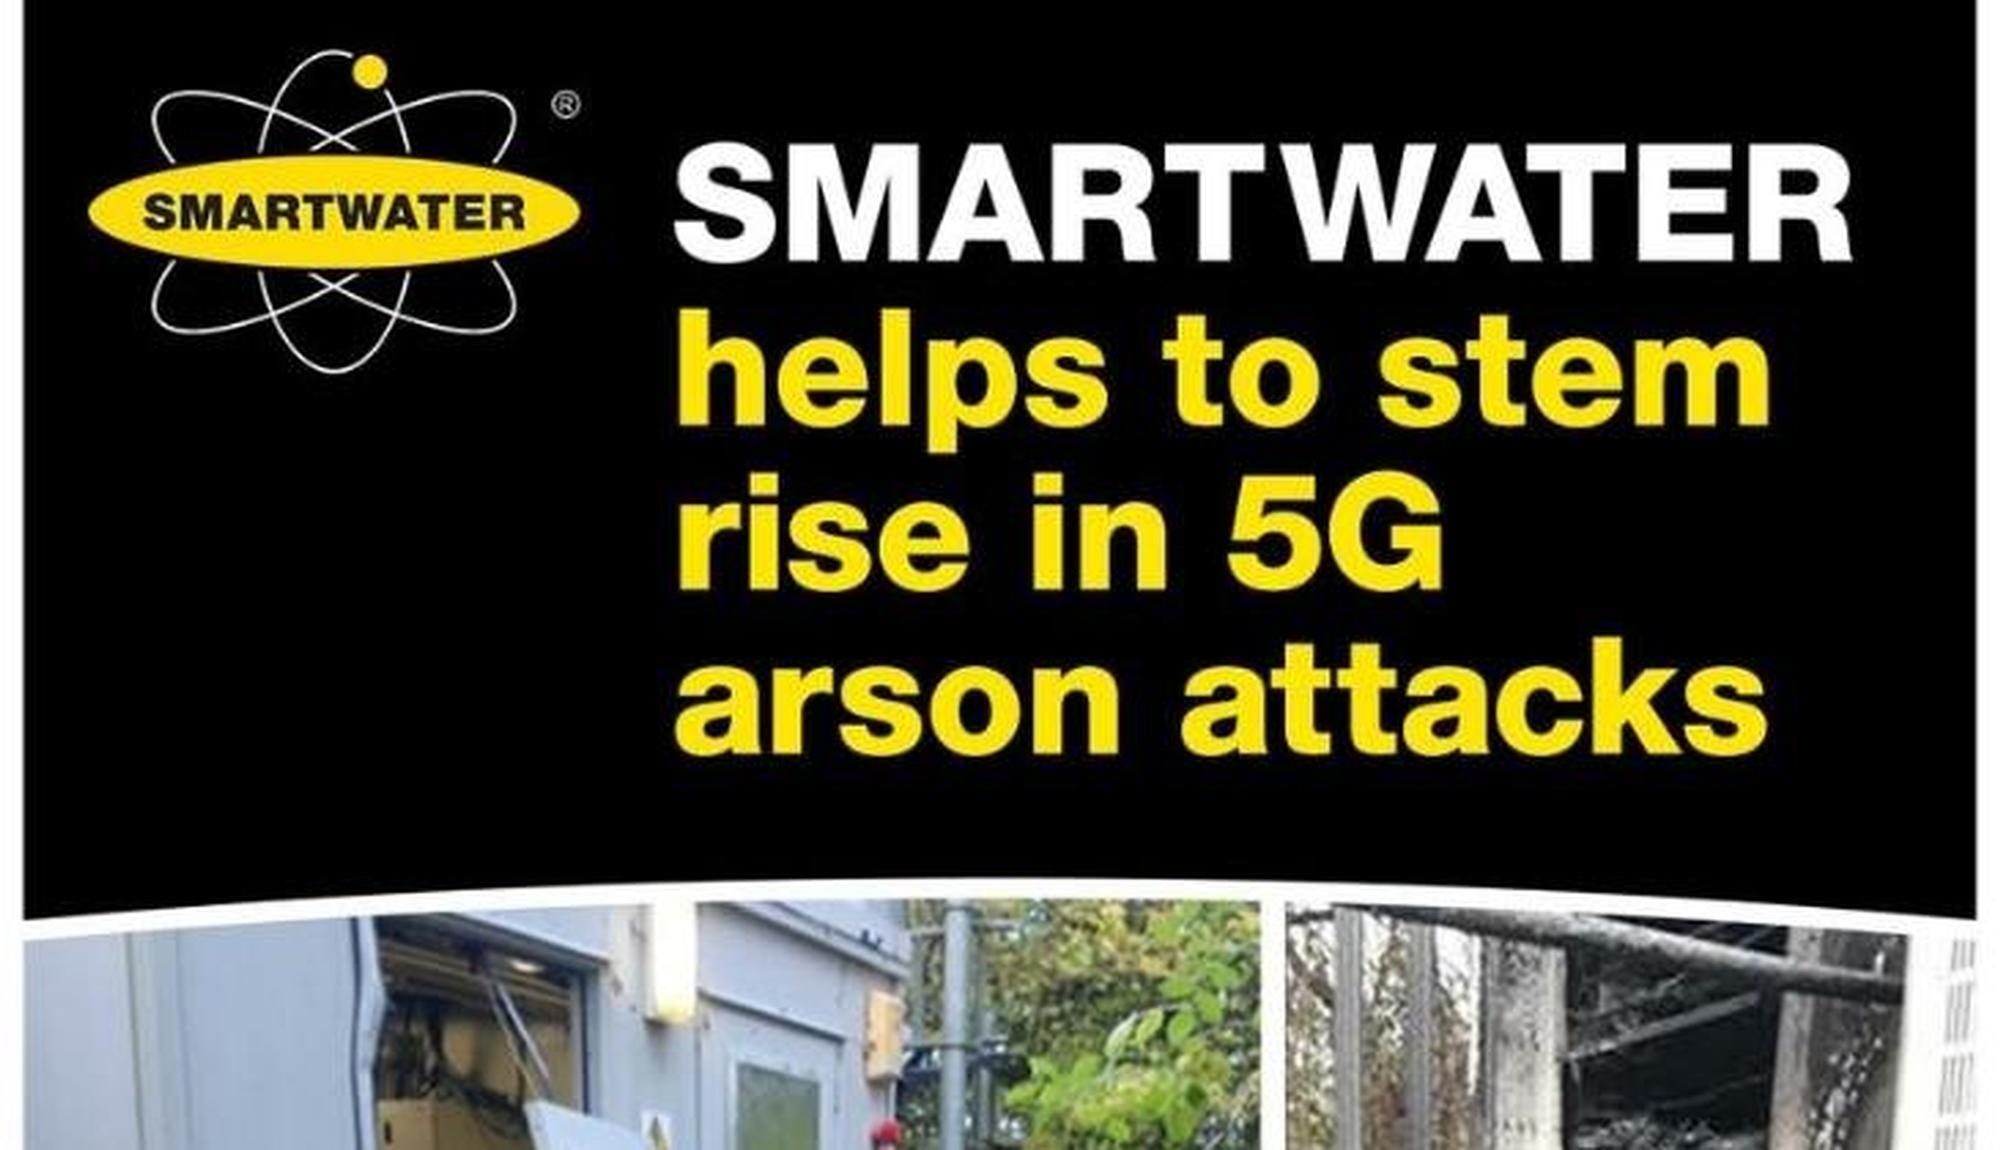 SmartWater helps to stem rise in 5G arson attacks